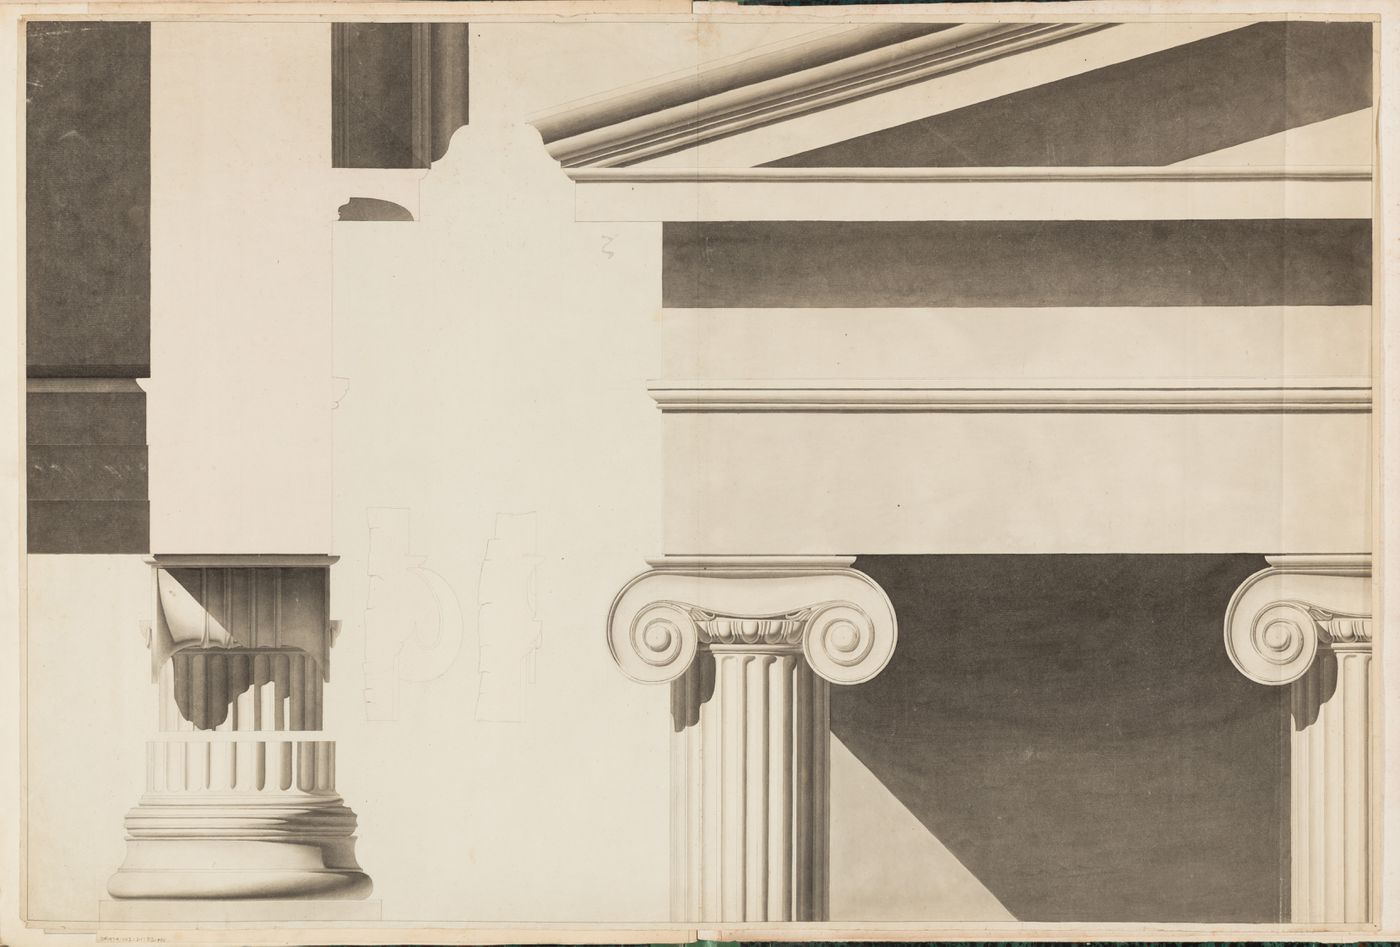 Elevation of an Ionic shaft, capital, and entablature with a section of the entablature and a side elevation and section of the capital and shaft